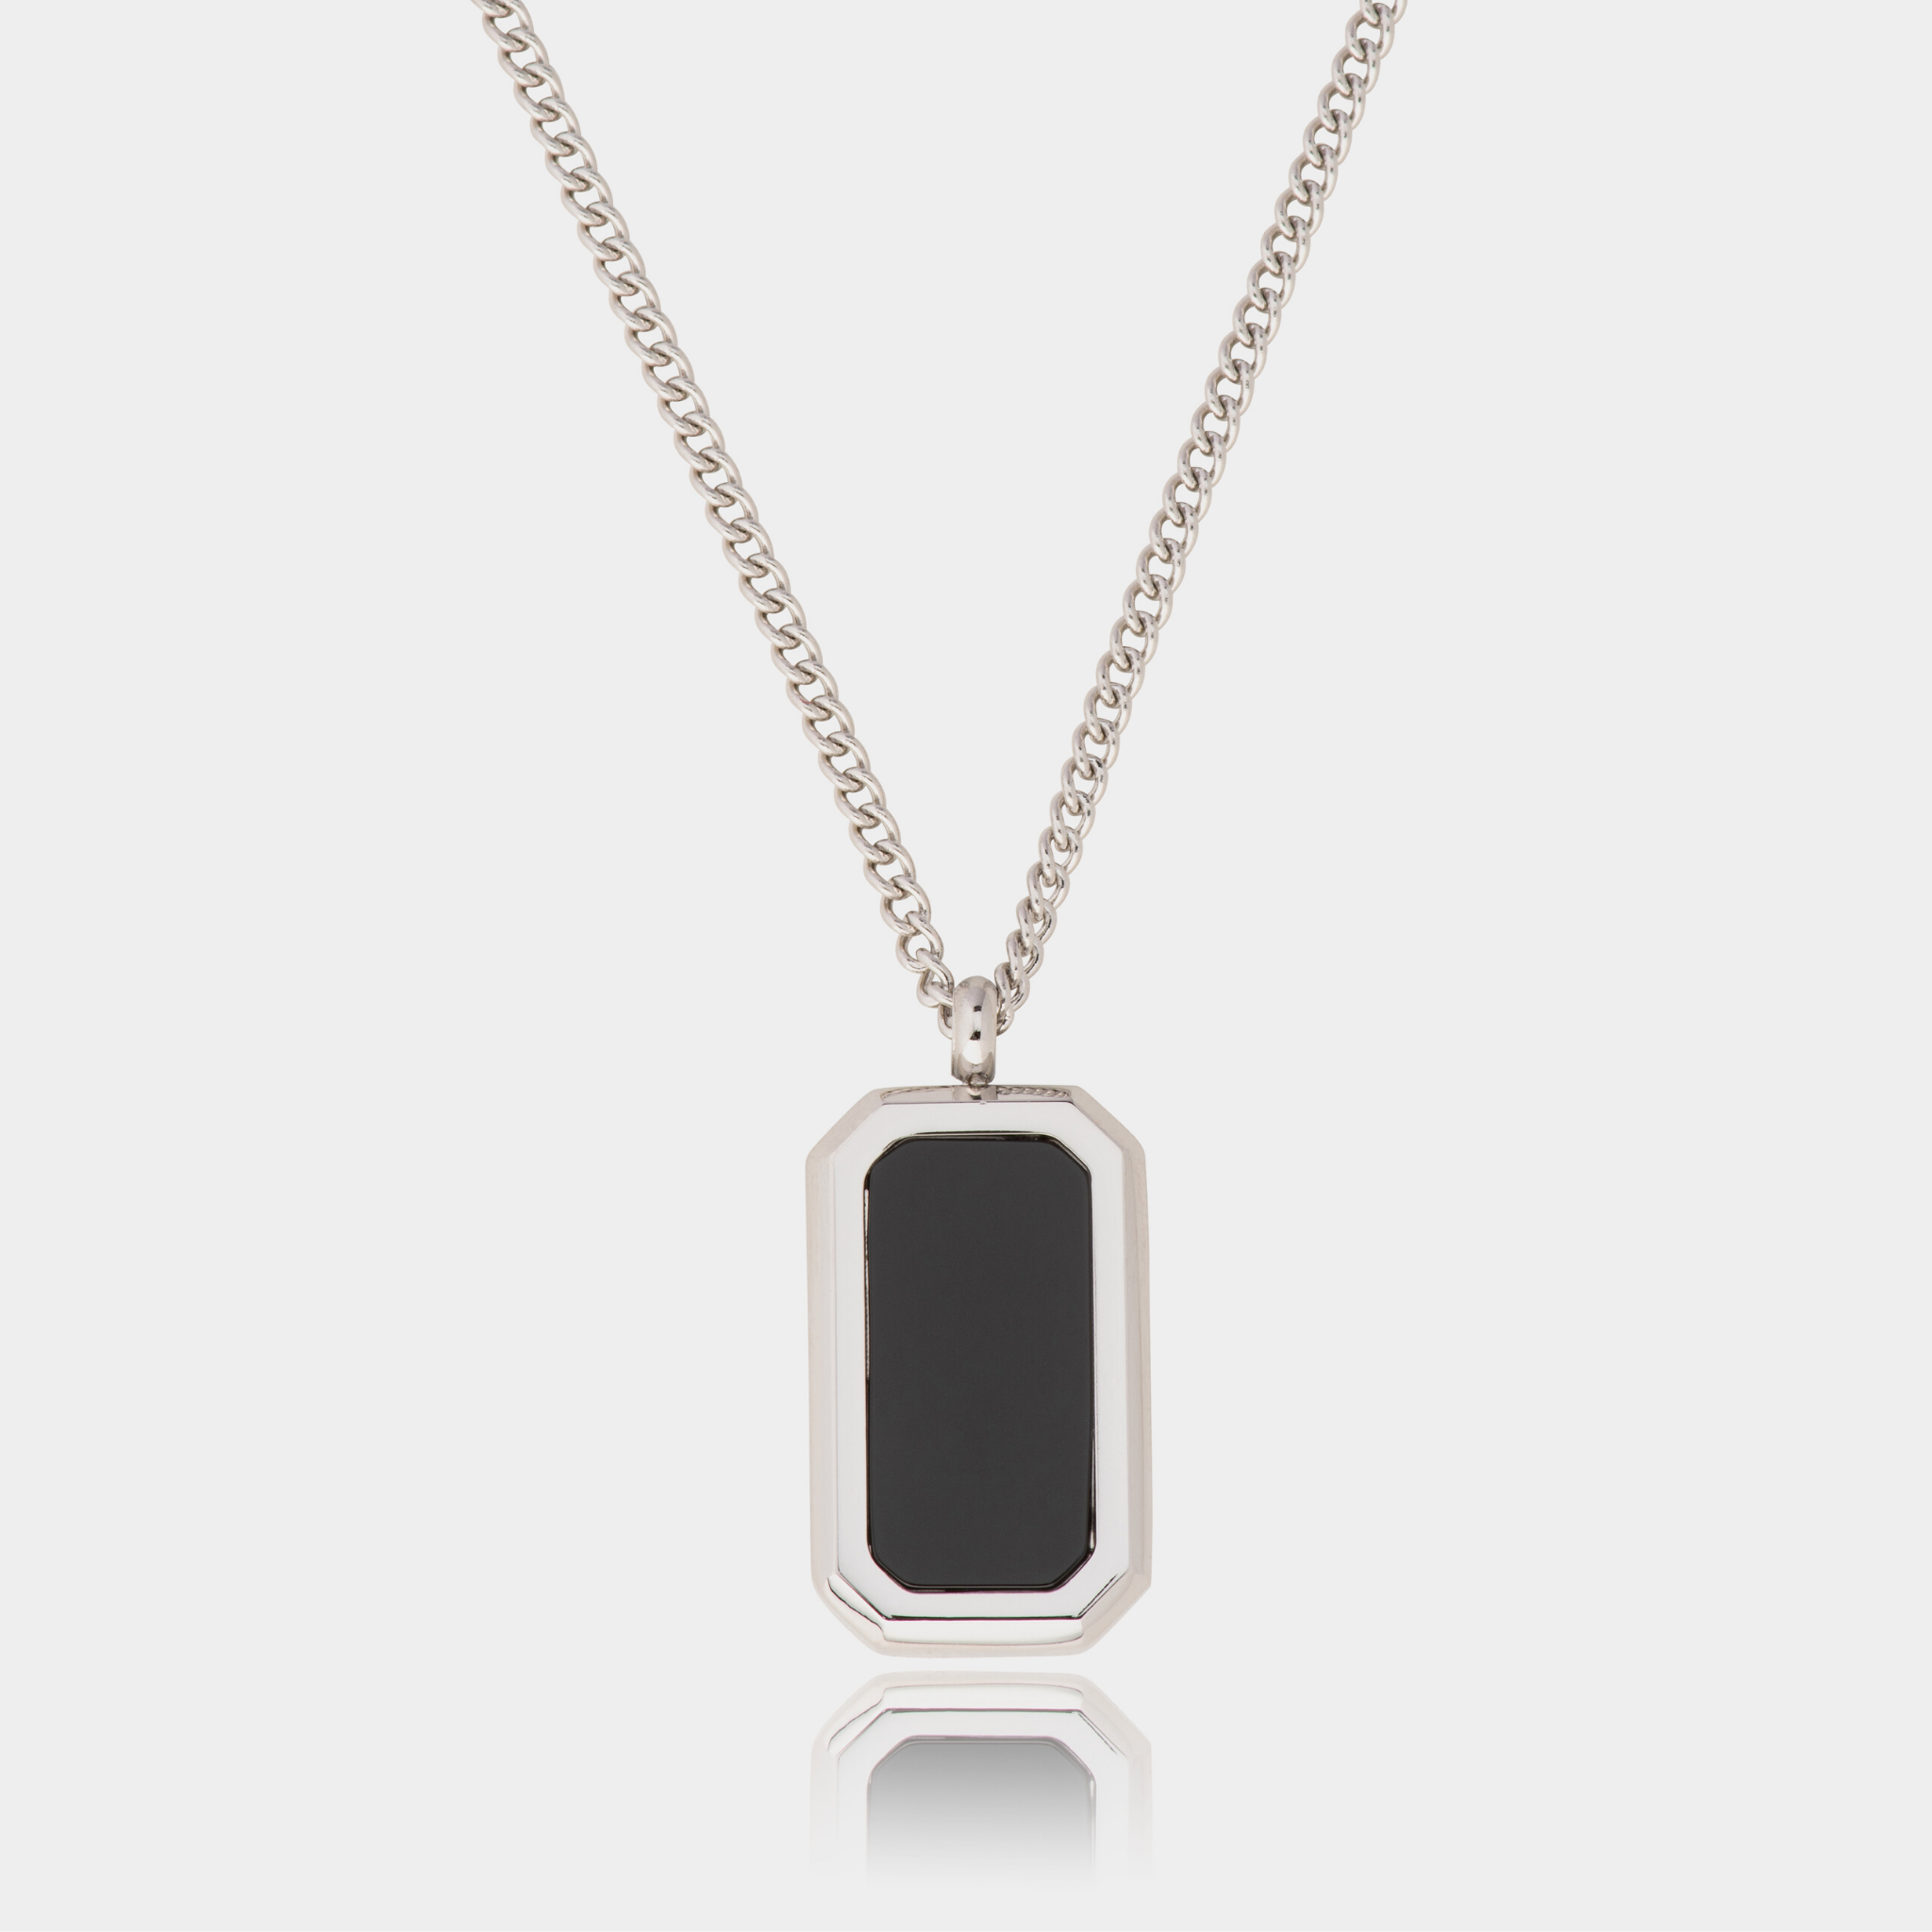 Stainless Steel and Natural Agate Crystal Pendant with Stainless Steel Necklace Chain